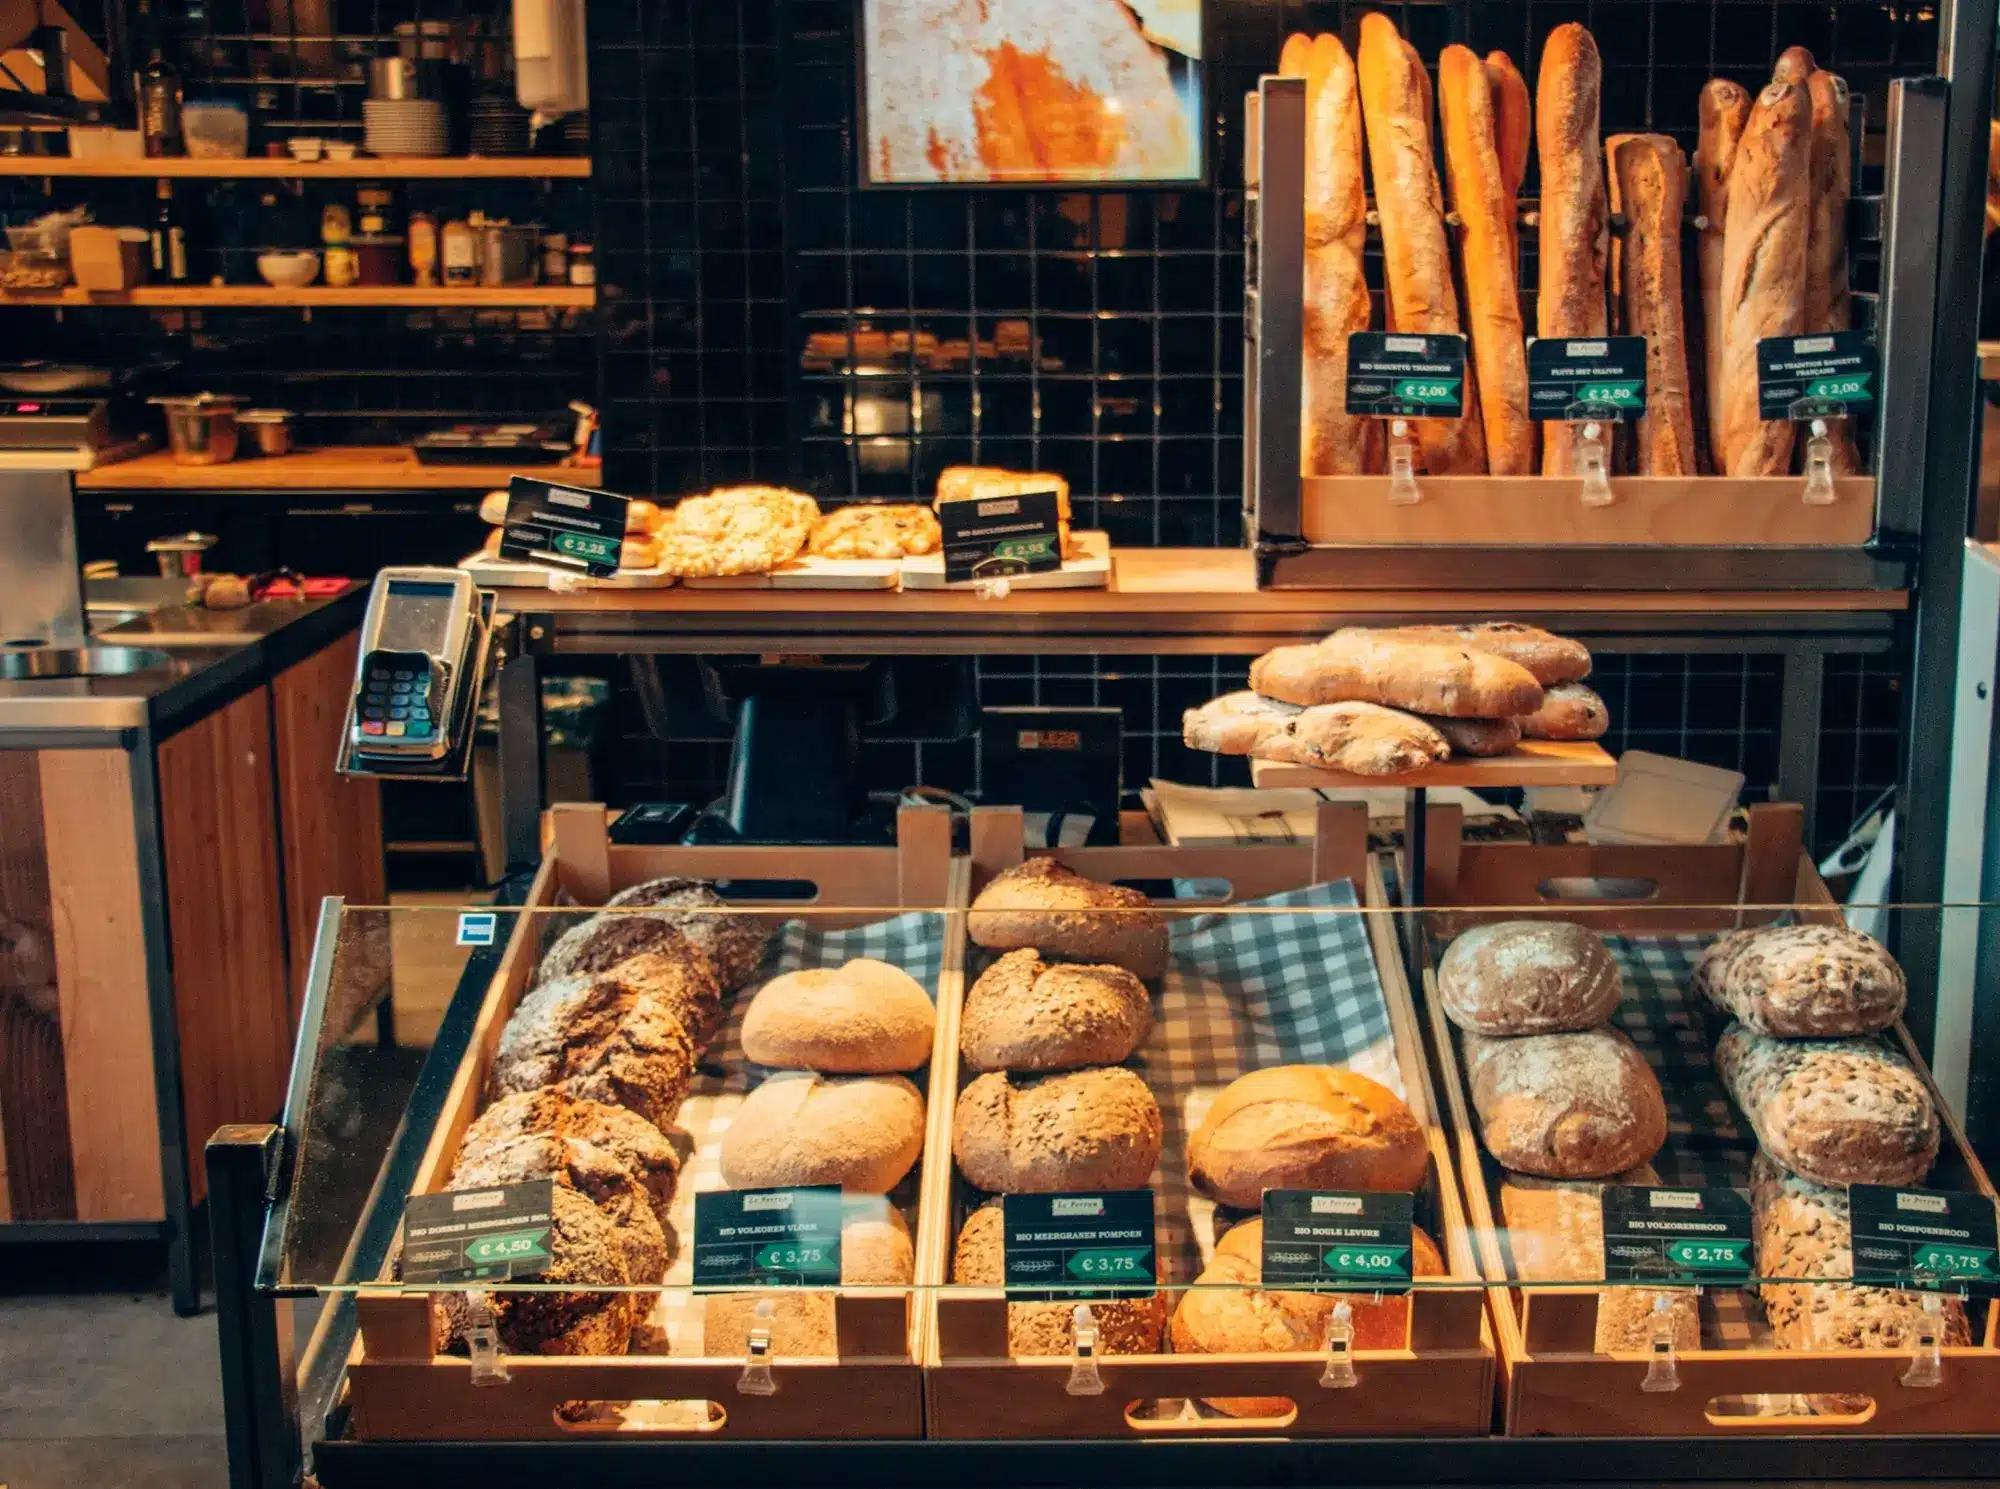 A display of pastries and bread inside a bakery.